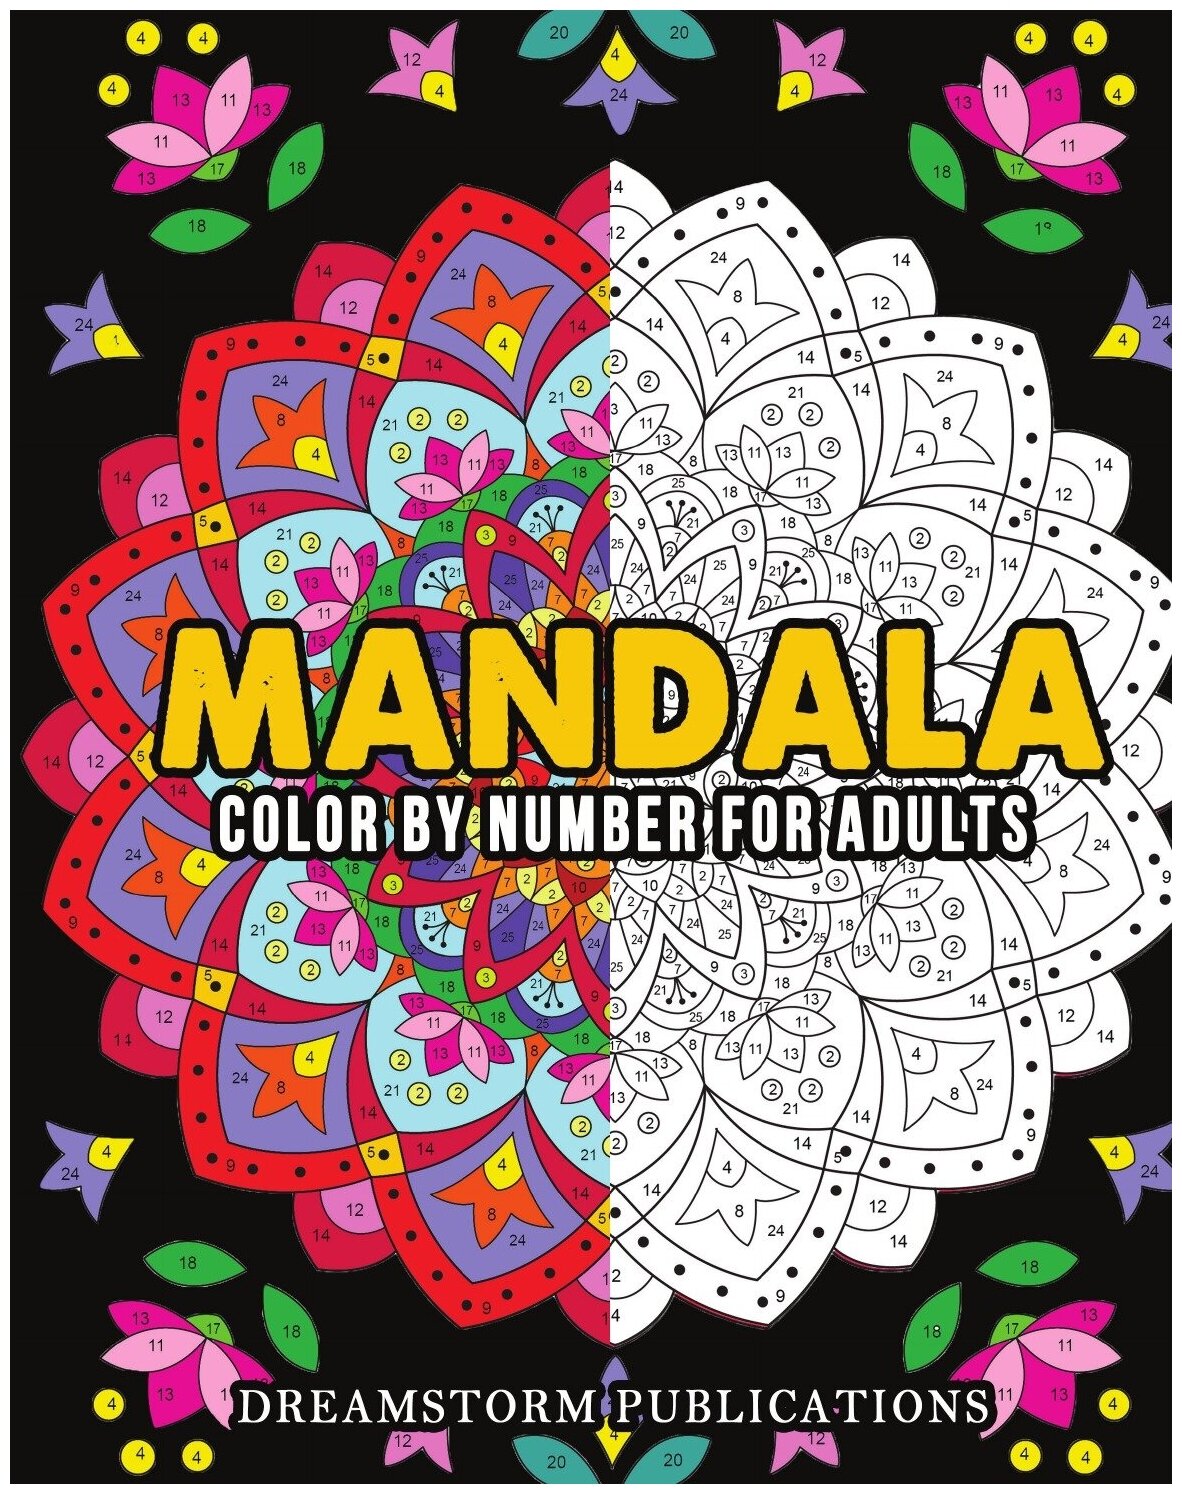 Mandala Color by Number for Adults